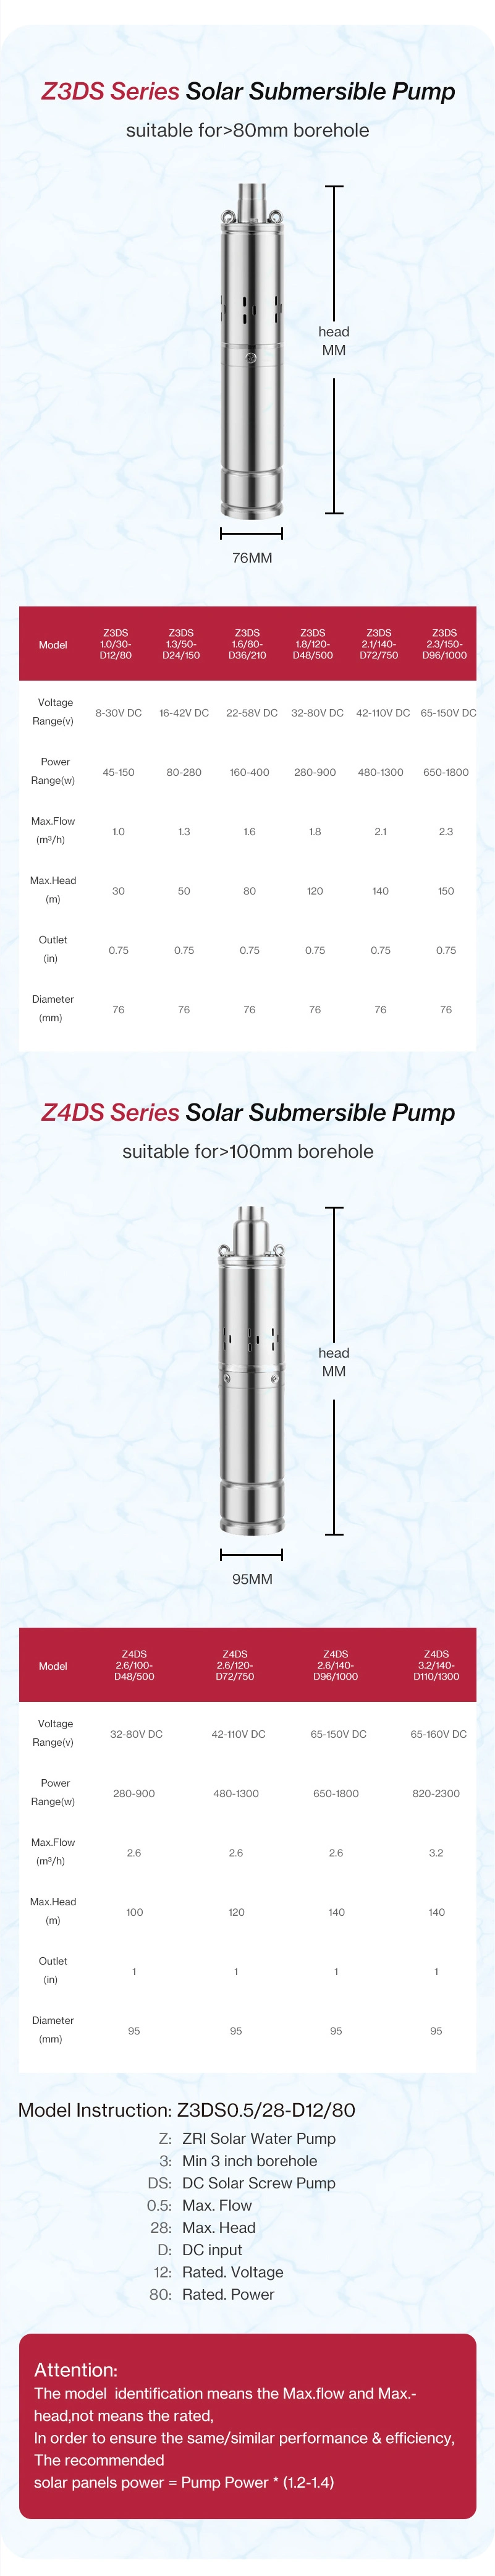 4 Inch Stainless Steel Impeller Solar Powered Centrifugal Submersible Pump MPPT Controller